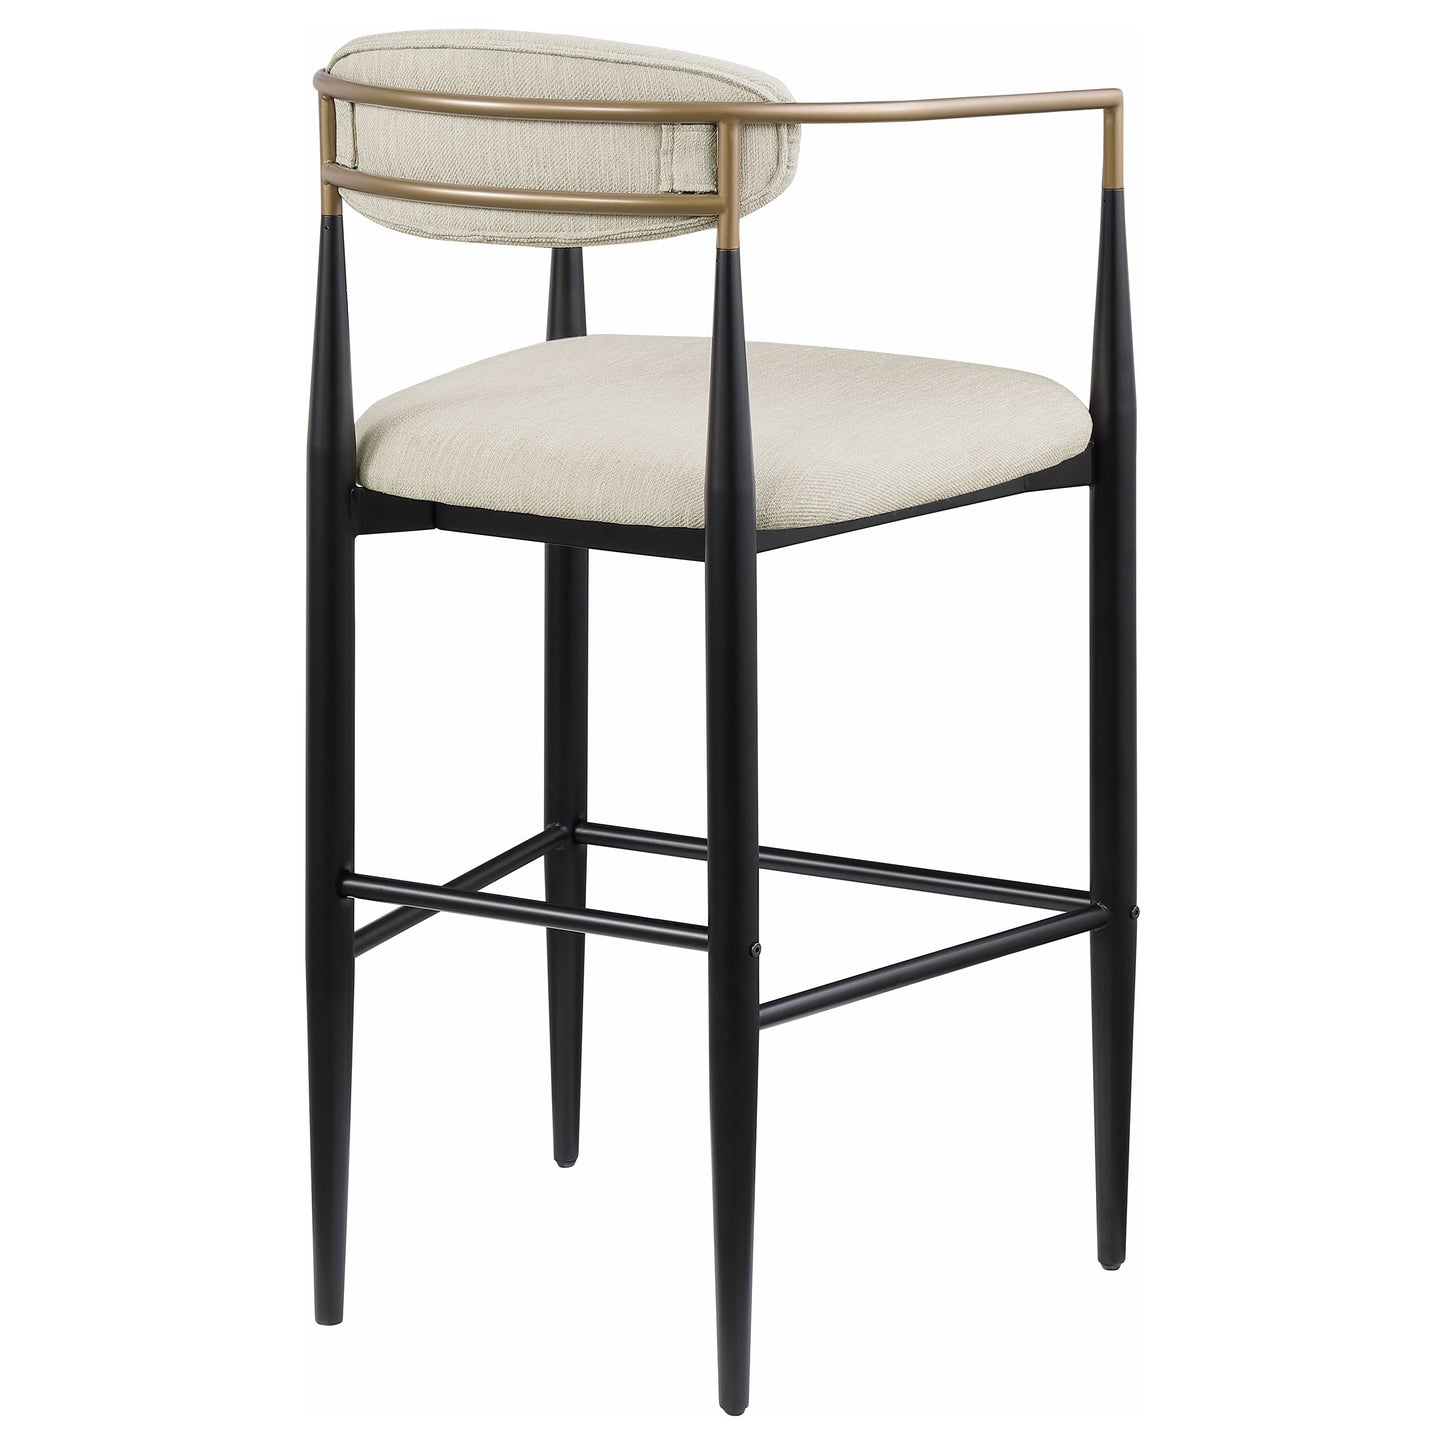 Tina Metal Pub Height Bar Stool with Upholstered Back and Seat Beige (Set of 2)